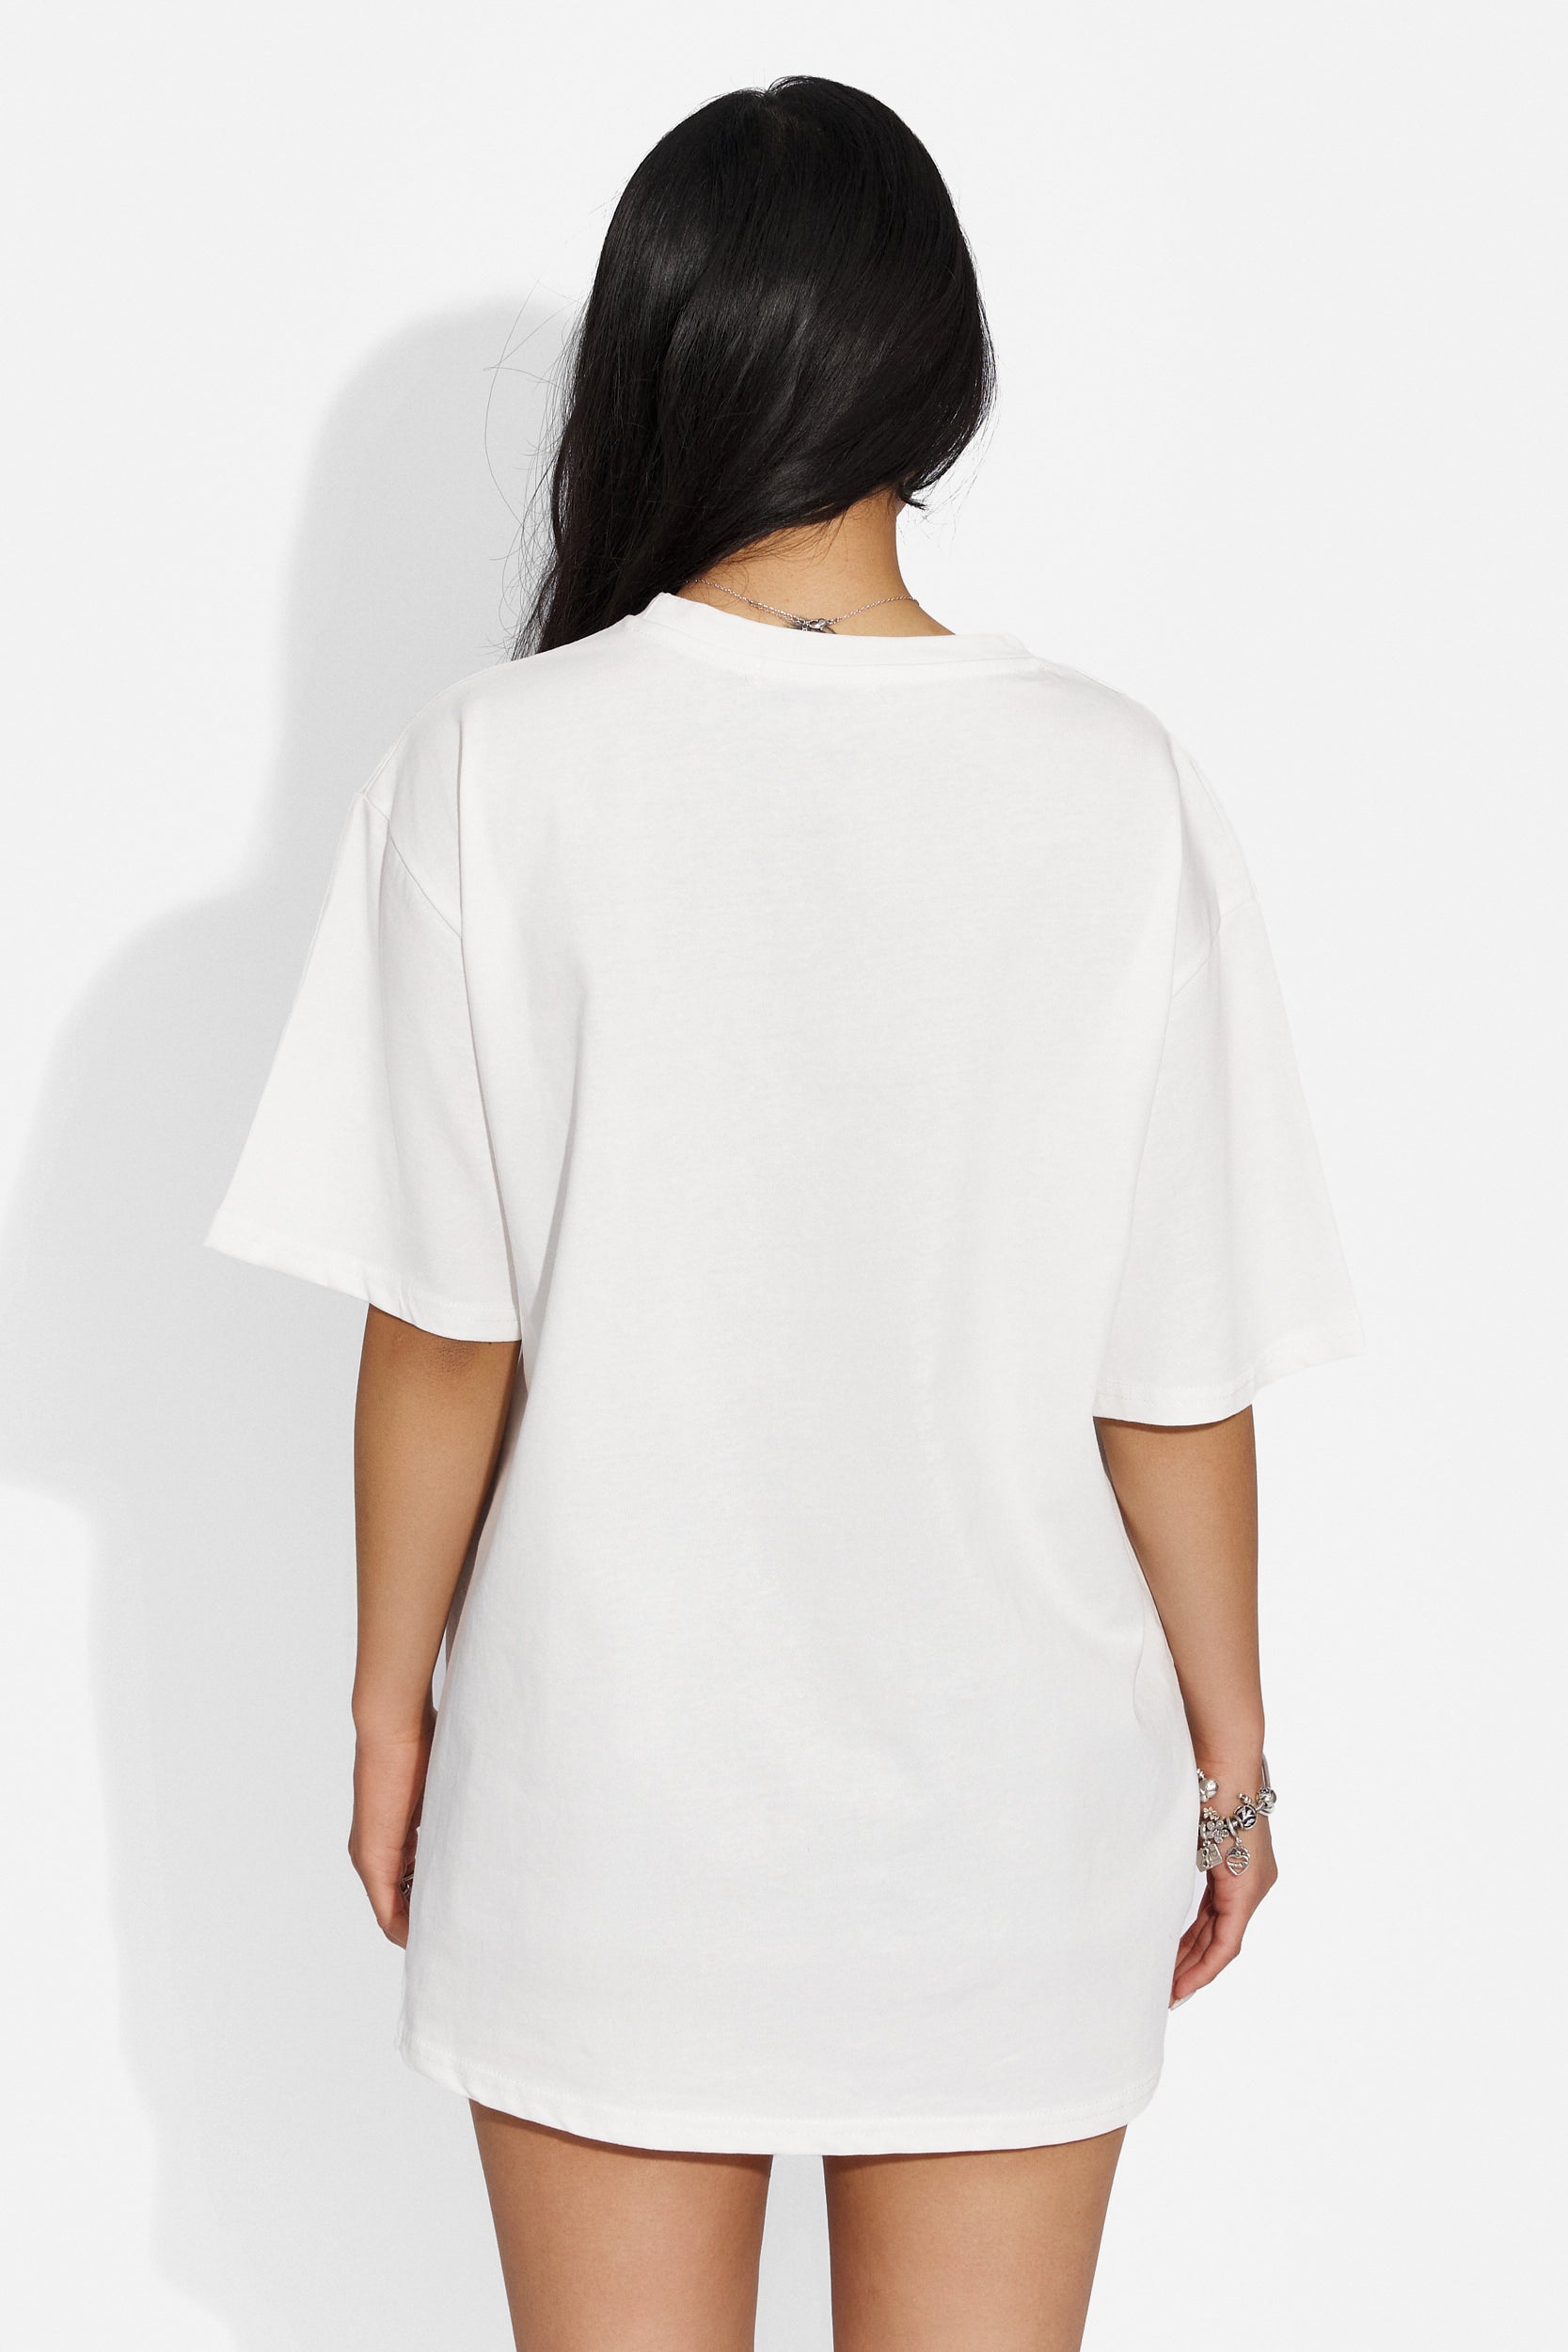 Forlany Bogas casual white ladies shirt